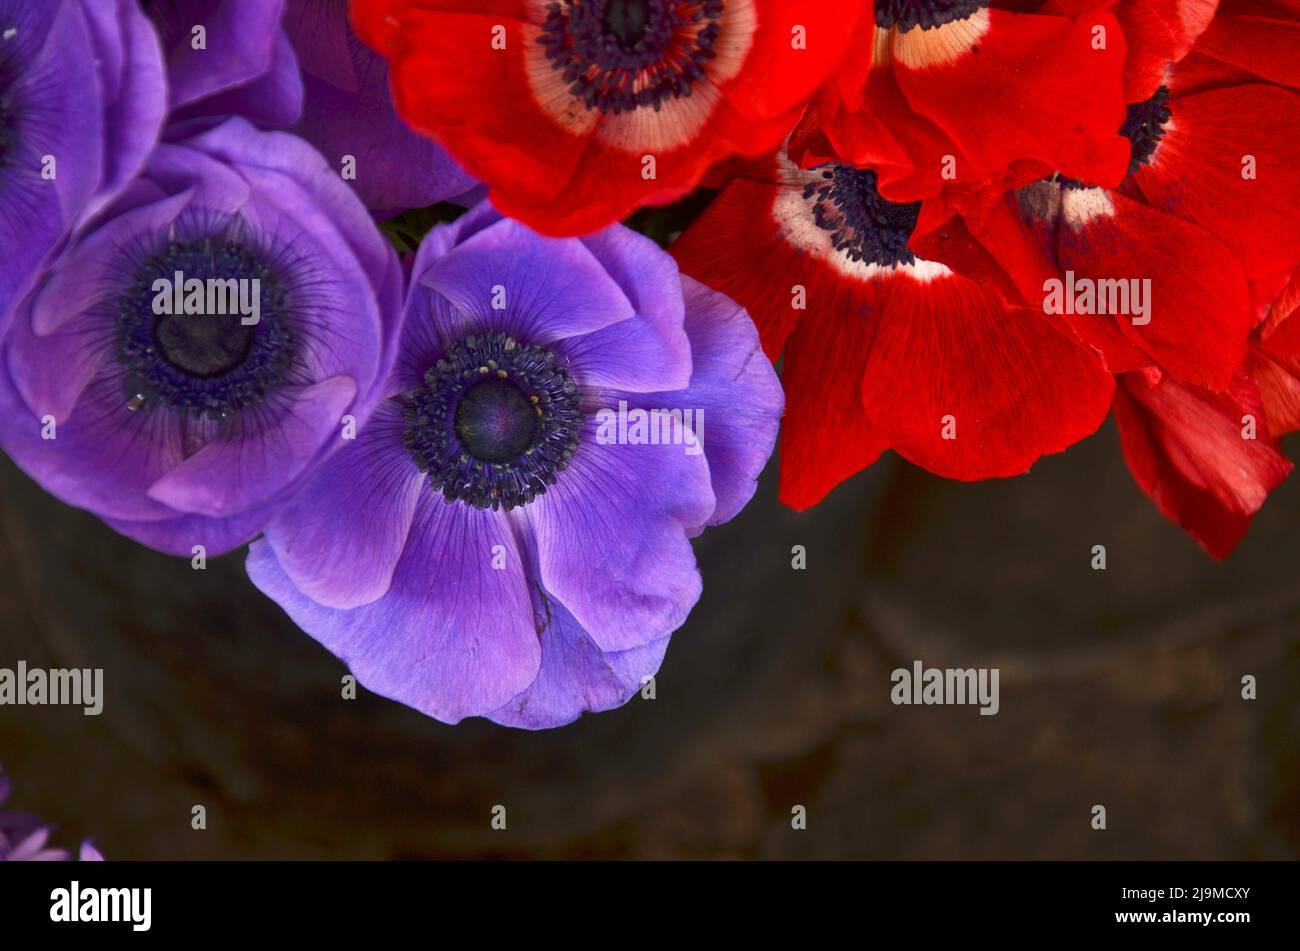 CLOSE UP OF A BEAUTIFUL PURPLE AND RED ANEMONE FLOWERS Stock Photo